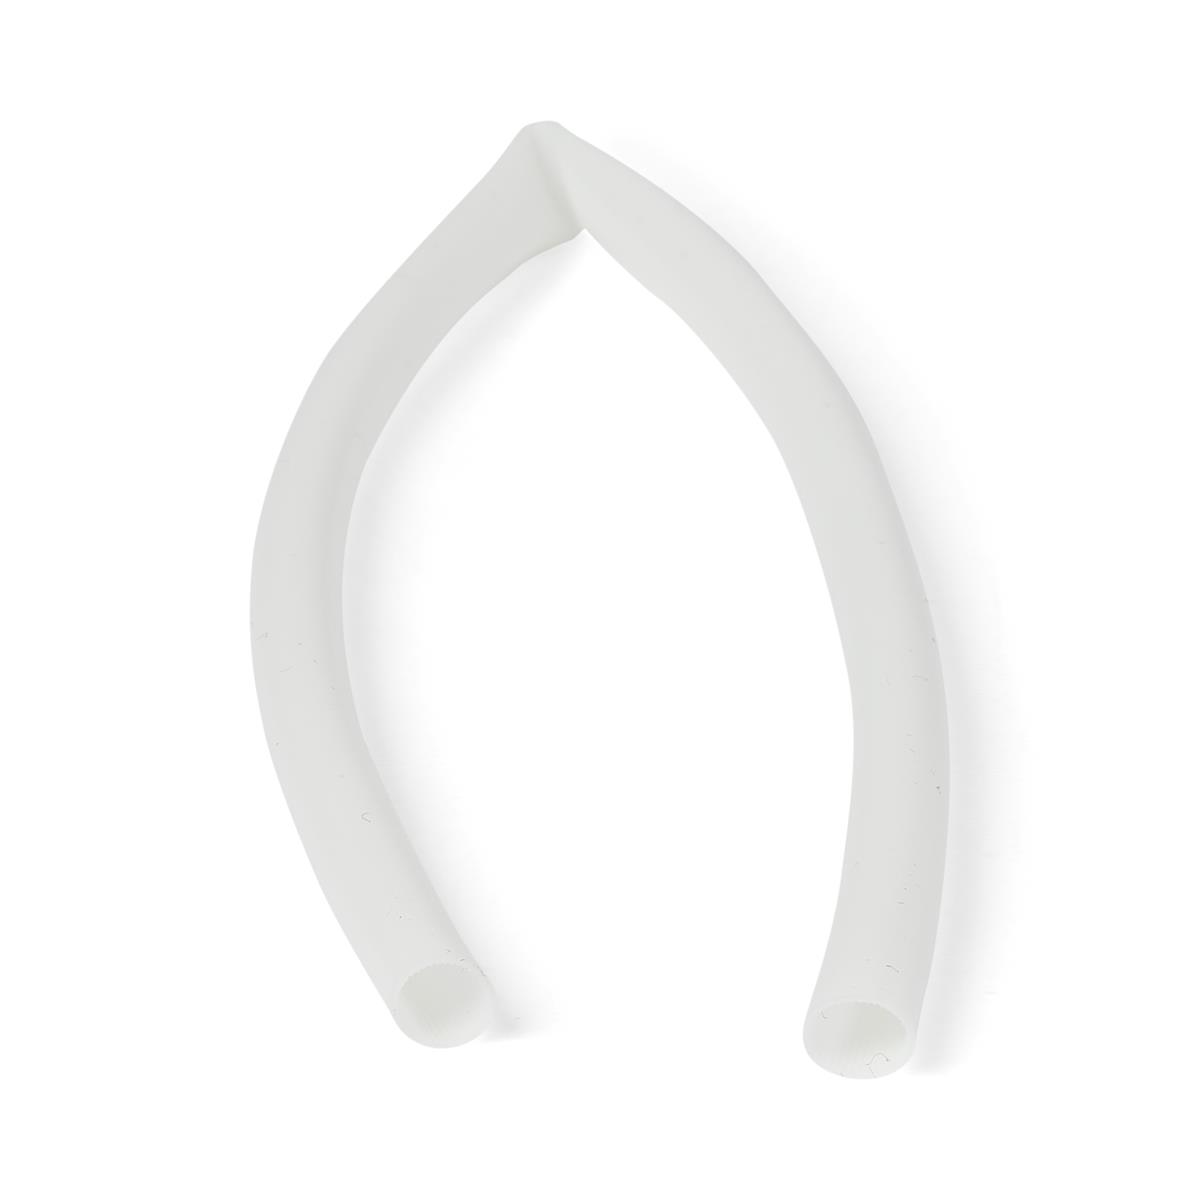 Silicone Penrose Drains for Closed Wound Drainage | Medline